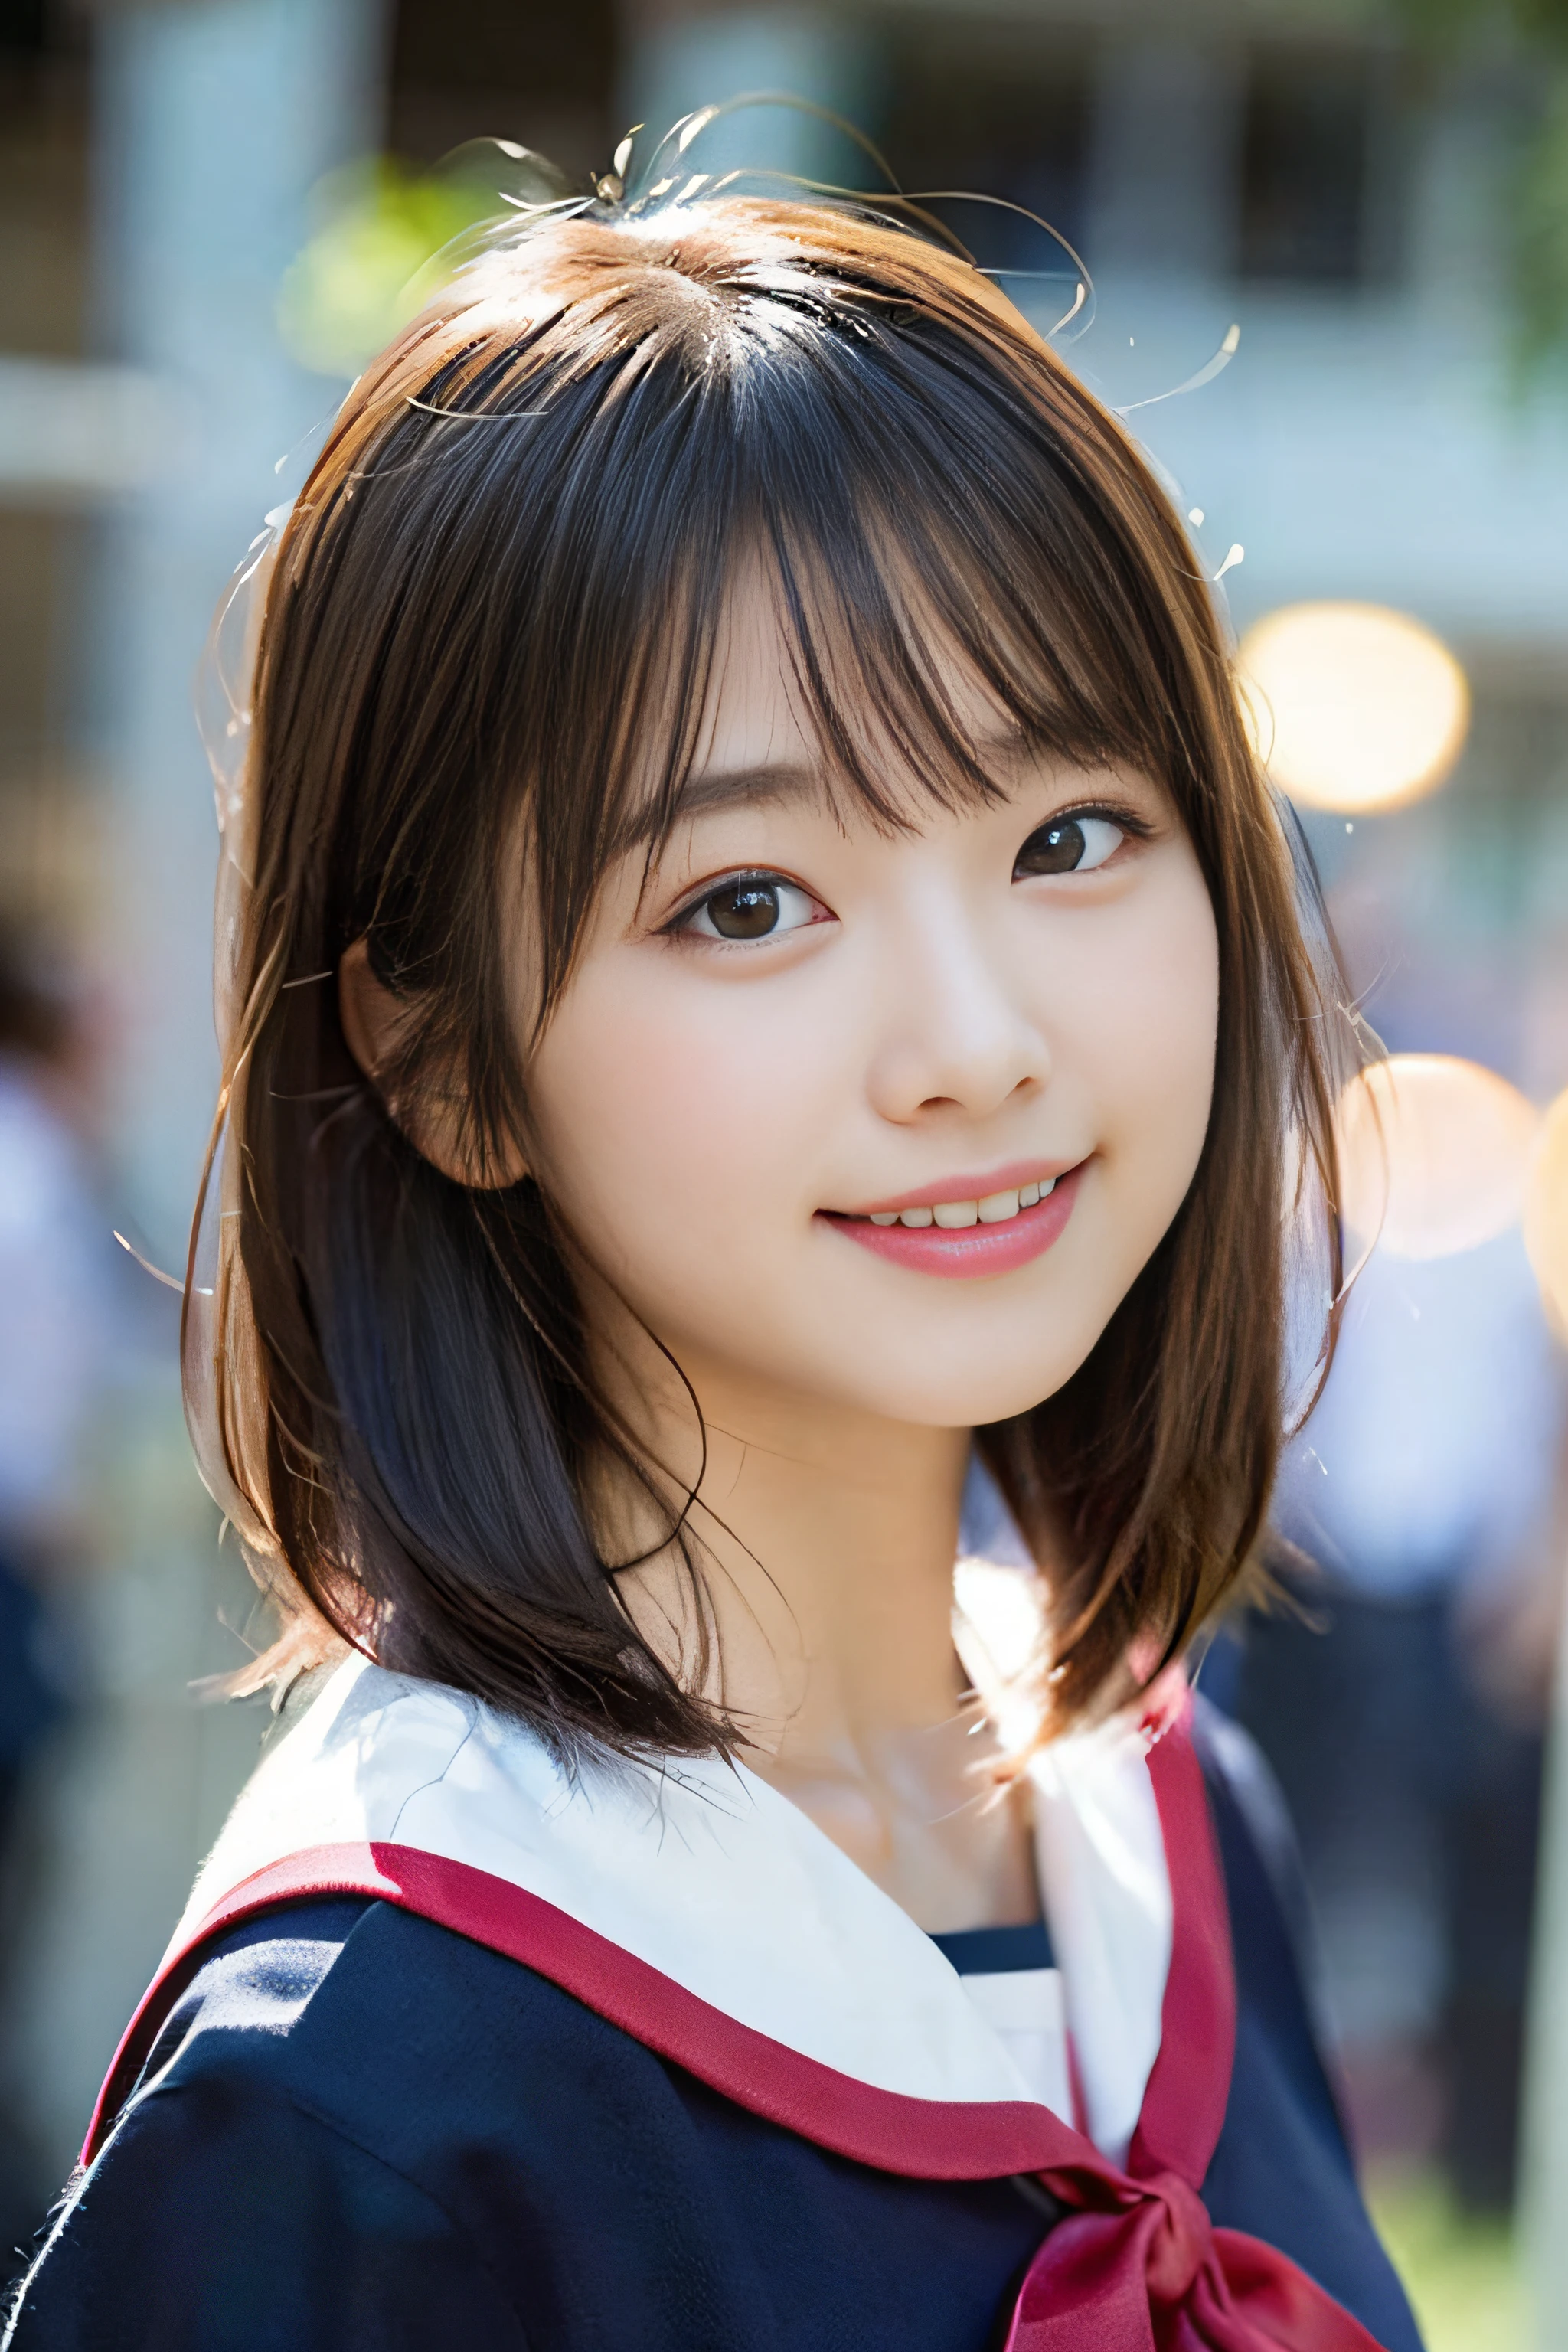 (8K、Raw photography、top-quality、​masterpiece:1.2)、(realisitic、Photorealsitic:1.37)、ultra-detailliert、超A high resolution、女の子1人、see the beholder、beautifull detailed face、A smile、Constriction、(Slim waist) :1.3)、Beautiful detailed skin、Skin Texture、Floating hair、Professional Lighting、Whole human body、Longhaire、a blond、japanese hight school uniform、a sailor suit、Bob Hair、E-cup、Happy smile、sixteen years old、Red ribbons、a baby face、Childish smile、Suppin、Moisturizing lips、Thin pink lips、Salar de Uyuni、Vast lakes